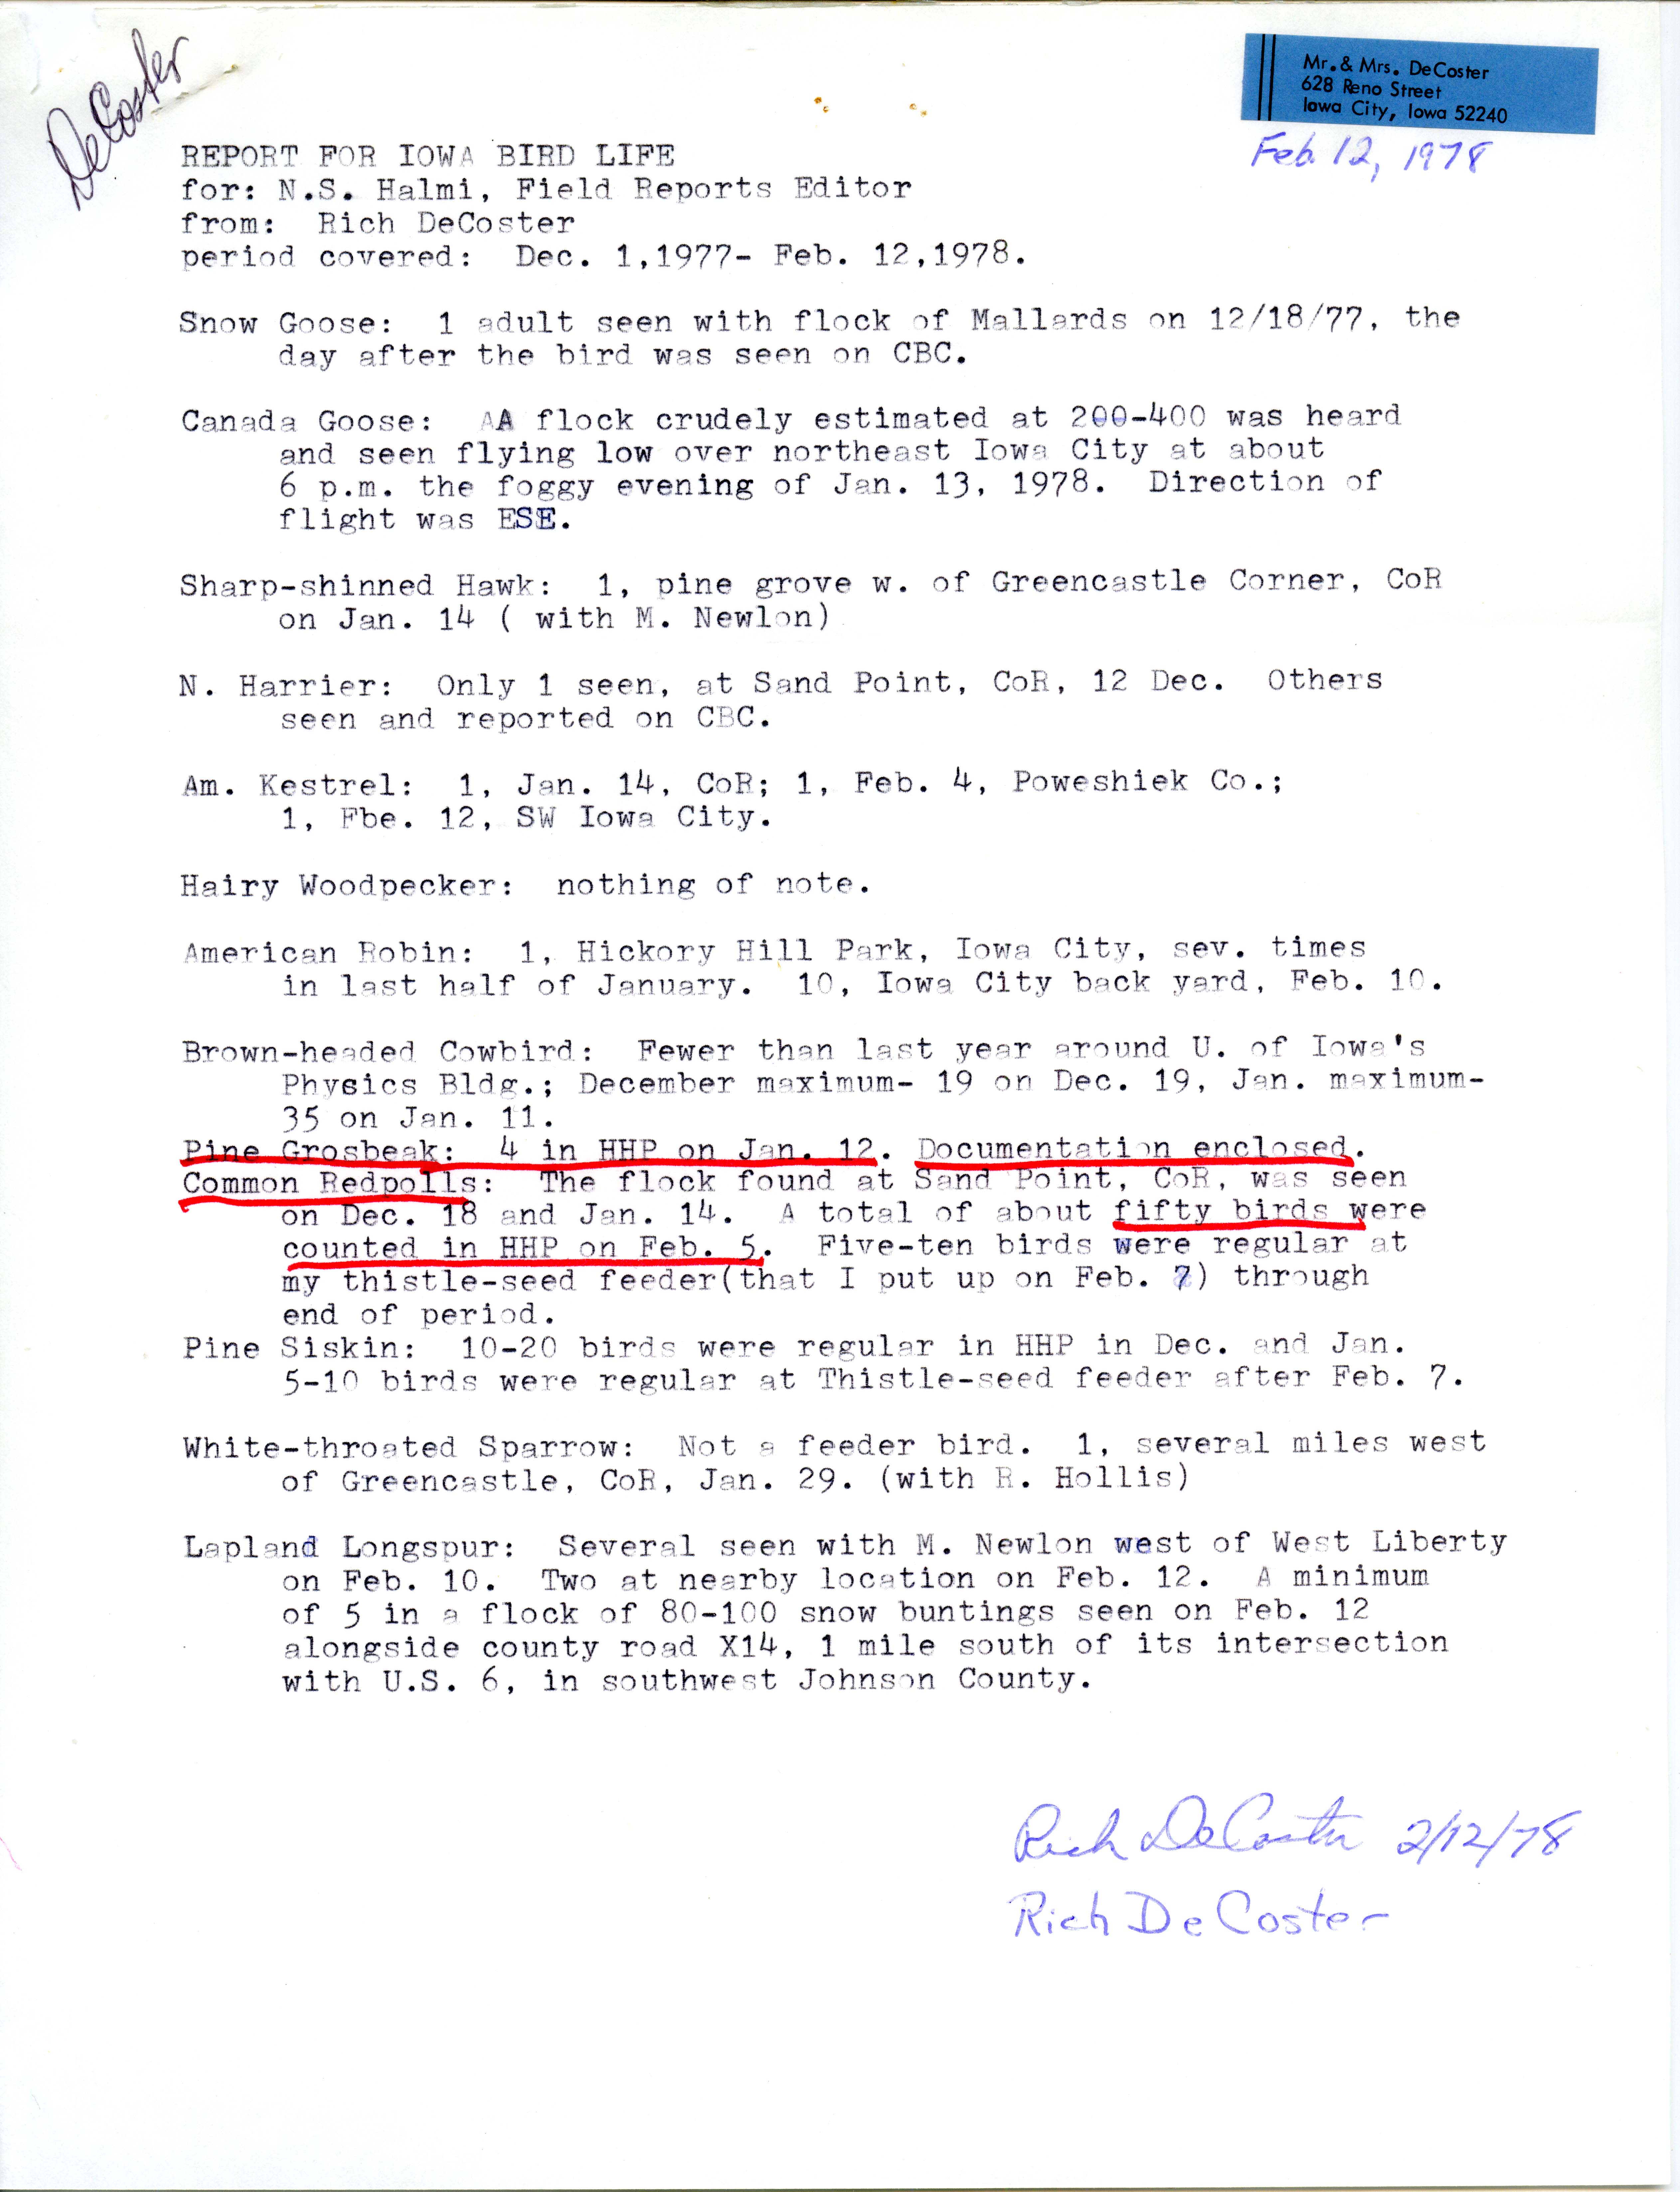 Rich DeCoster letter to Nicholas S. Halmi, regarding bird sightings, March 1, 1978 and report for Iowa bird life